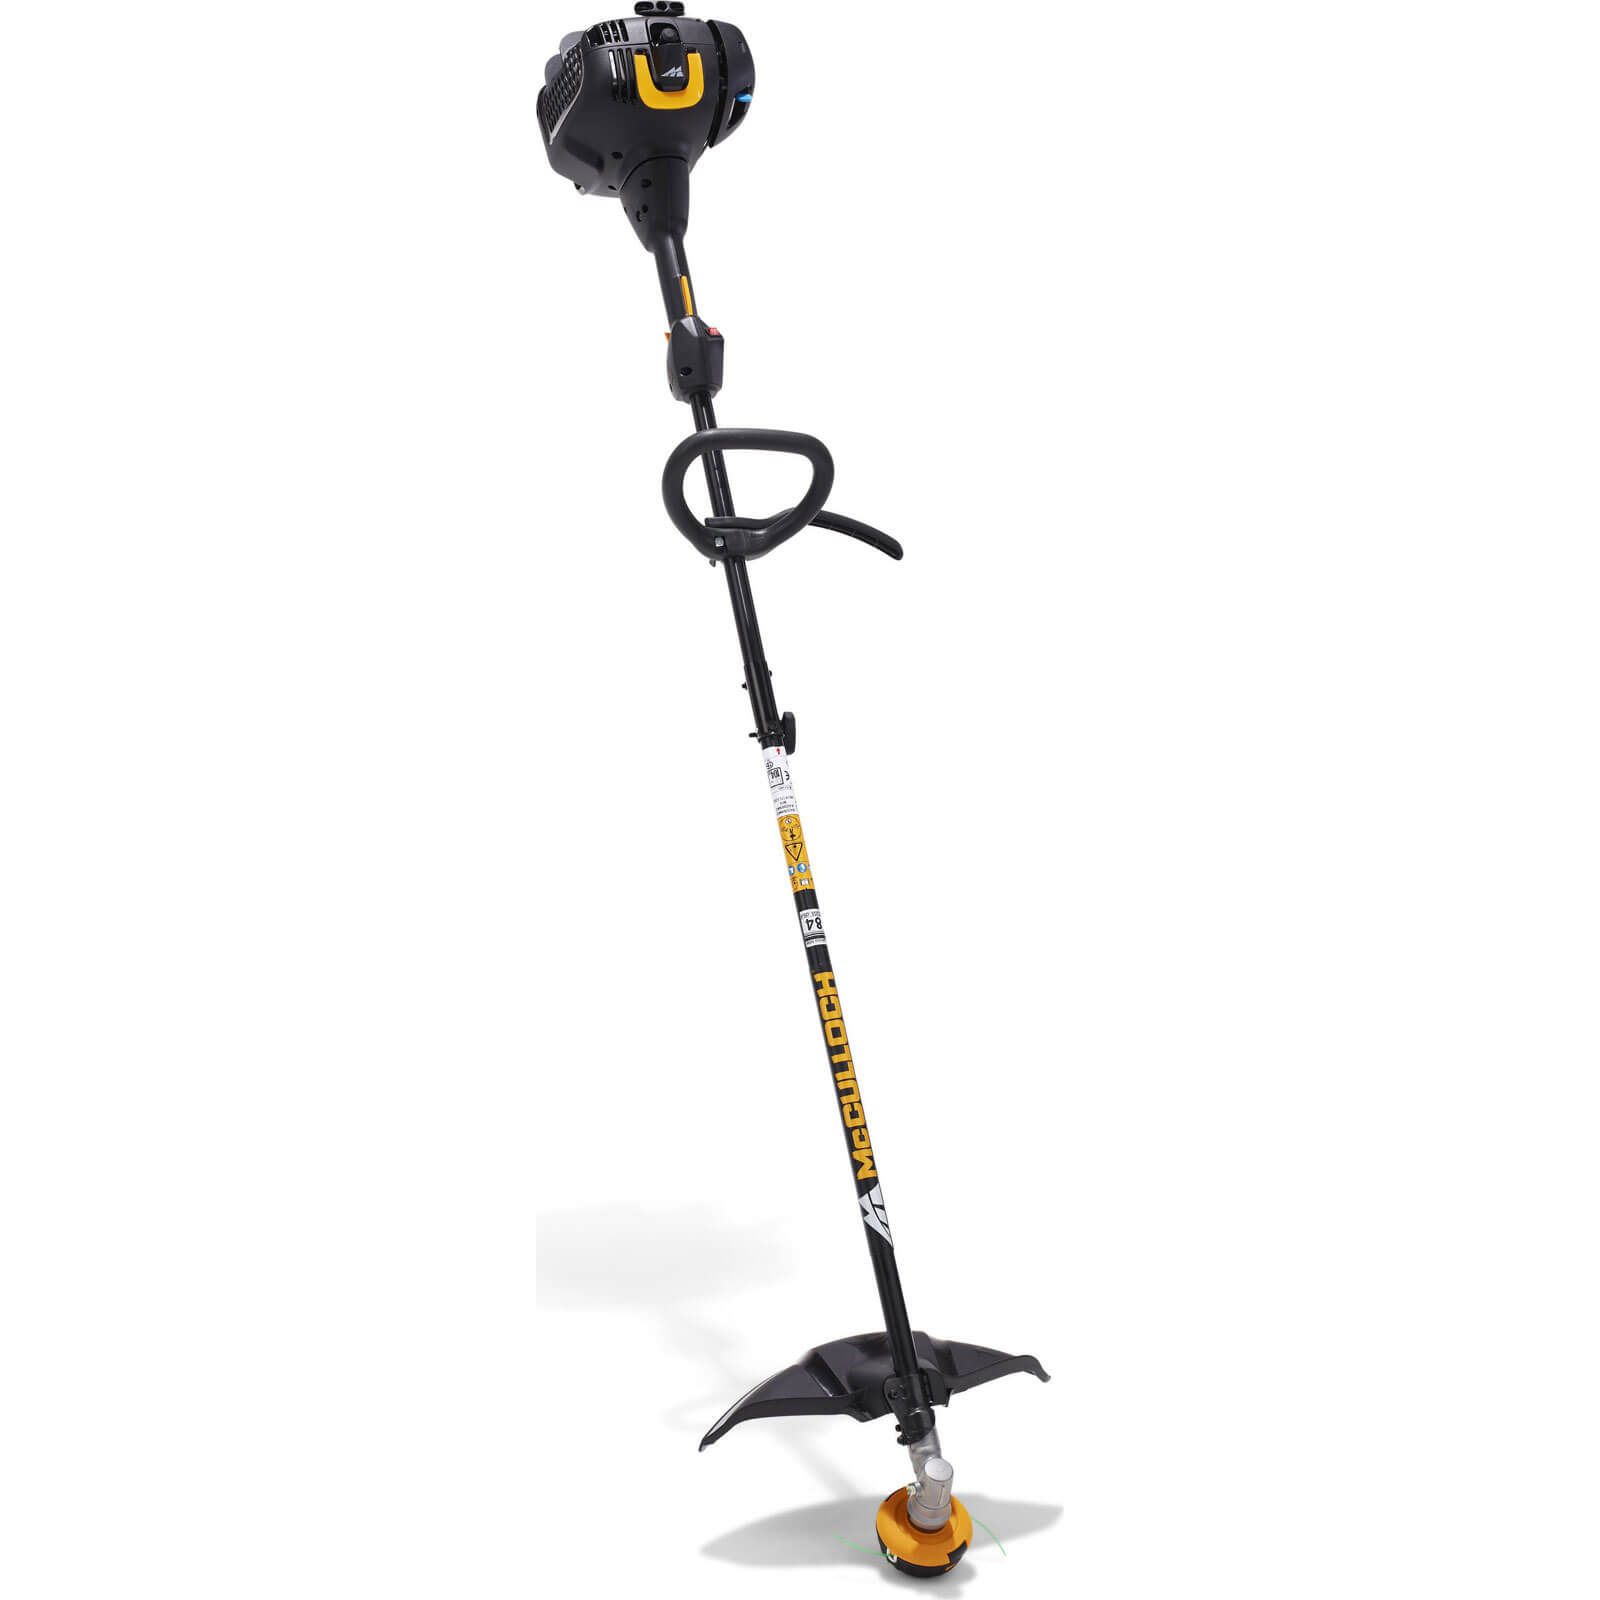 McCulloch B26 PS Petrol Brush Cutter 430mm Cut Width with 26cc 2 Stroke Engine is Attachment Compatible